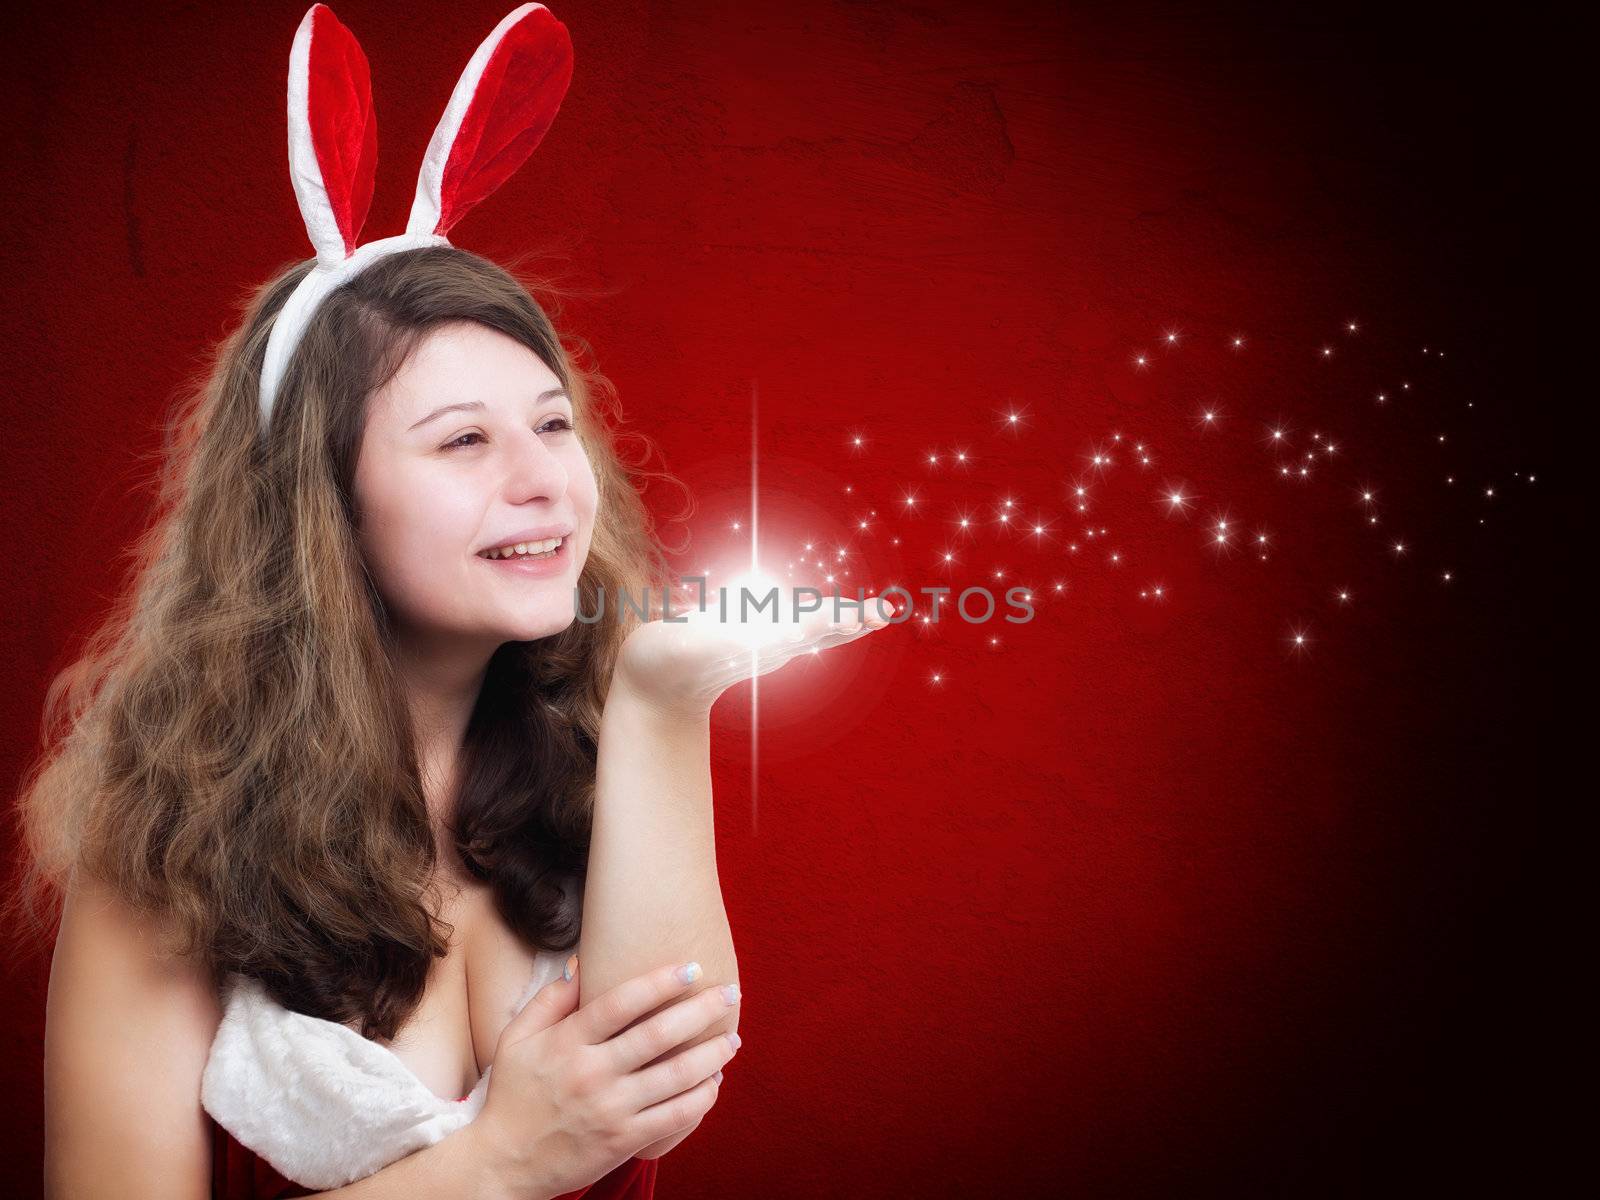 Christmas Woman blowing some stars on red background